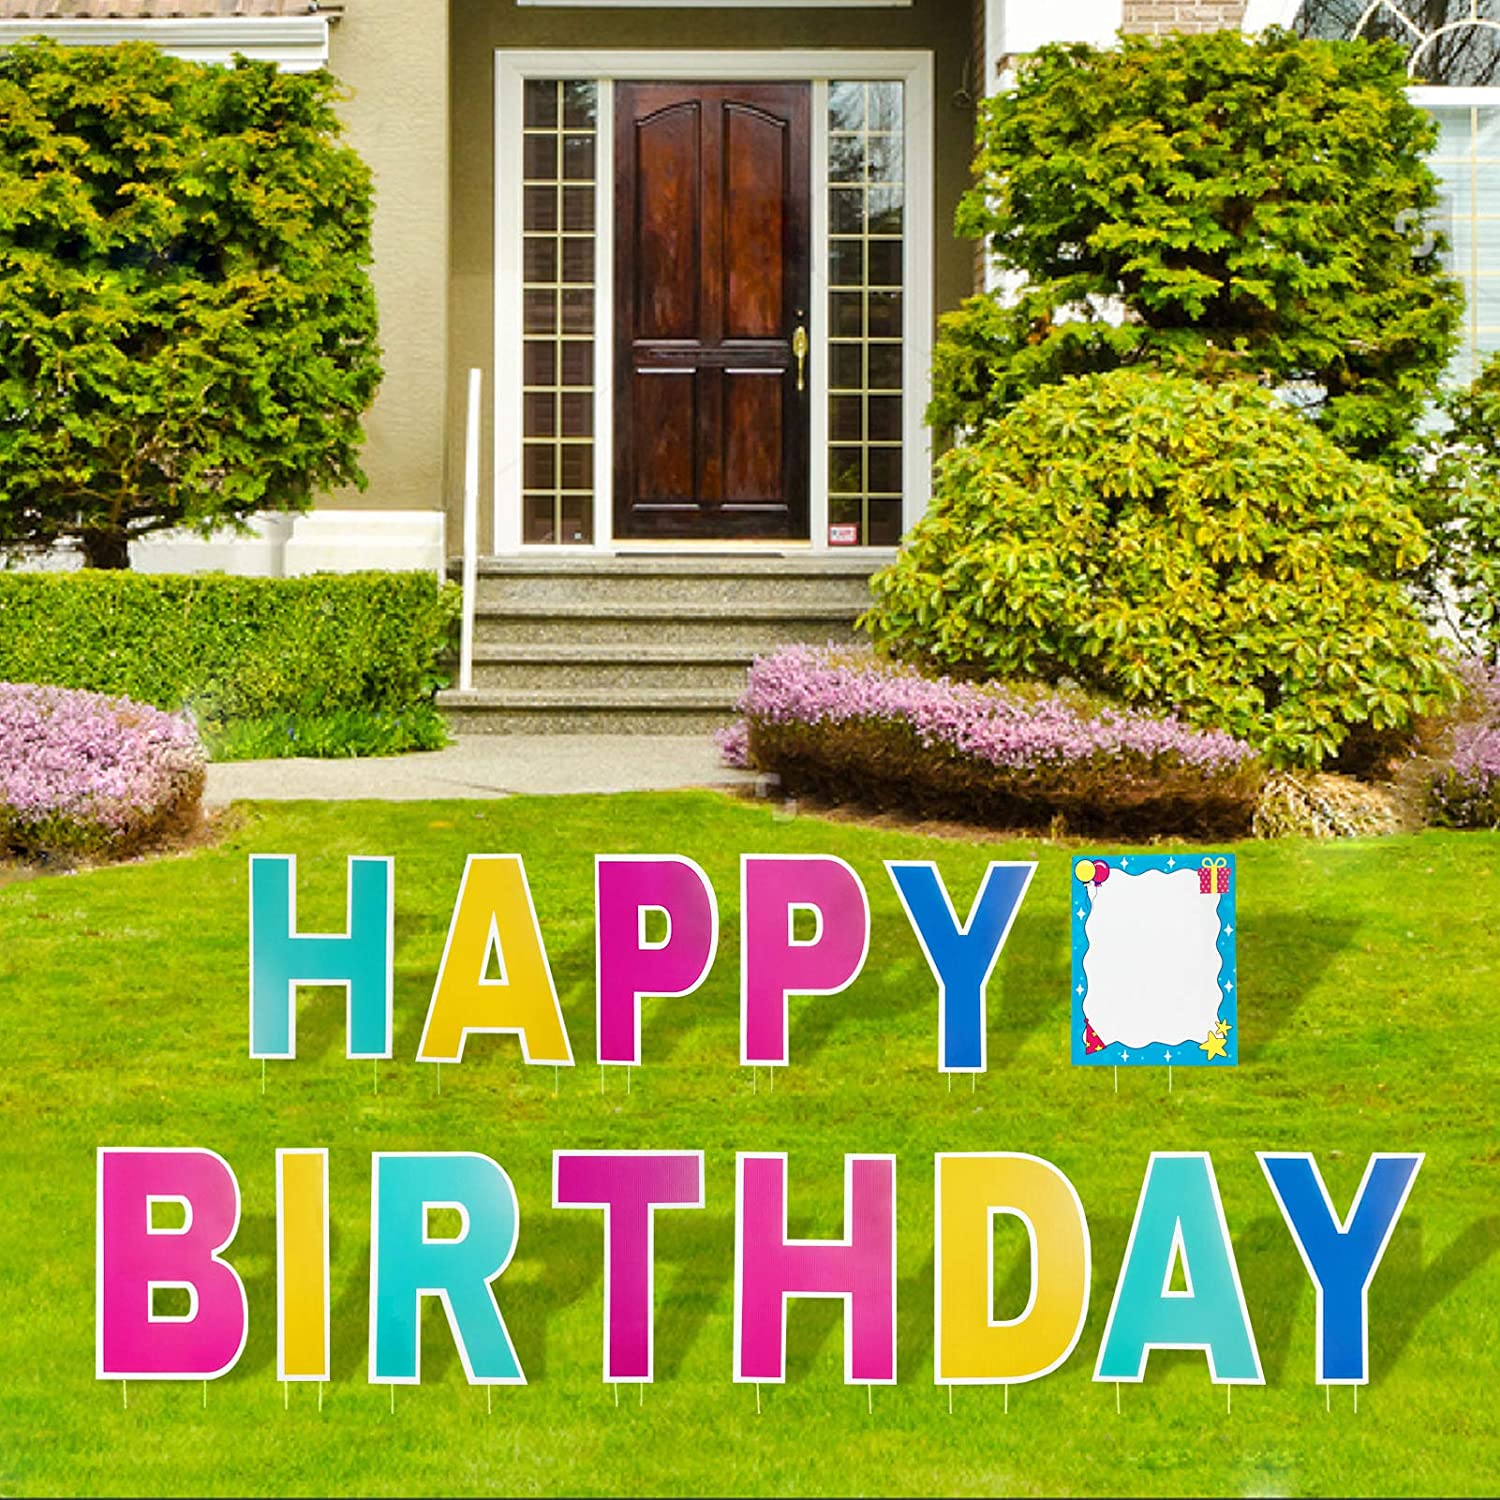 Hot-selling Happy Birthday Sign Rentals - Happy Birthday Yard Sign 16 Inch Birthday Letters Lawn Sign Colorful Birthday Yard Decoration with Stakes Cake Balloon Waterproof Garden Lawn Decor for Ou...